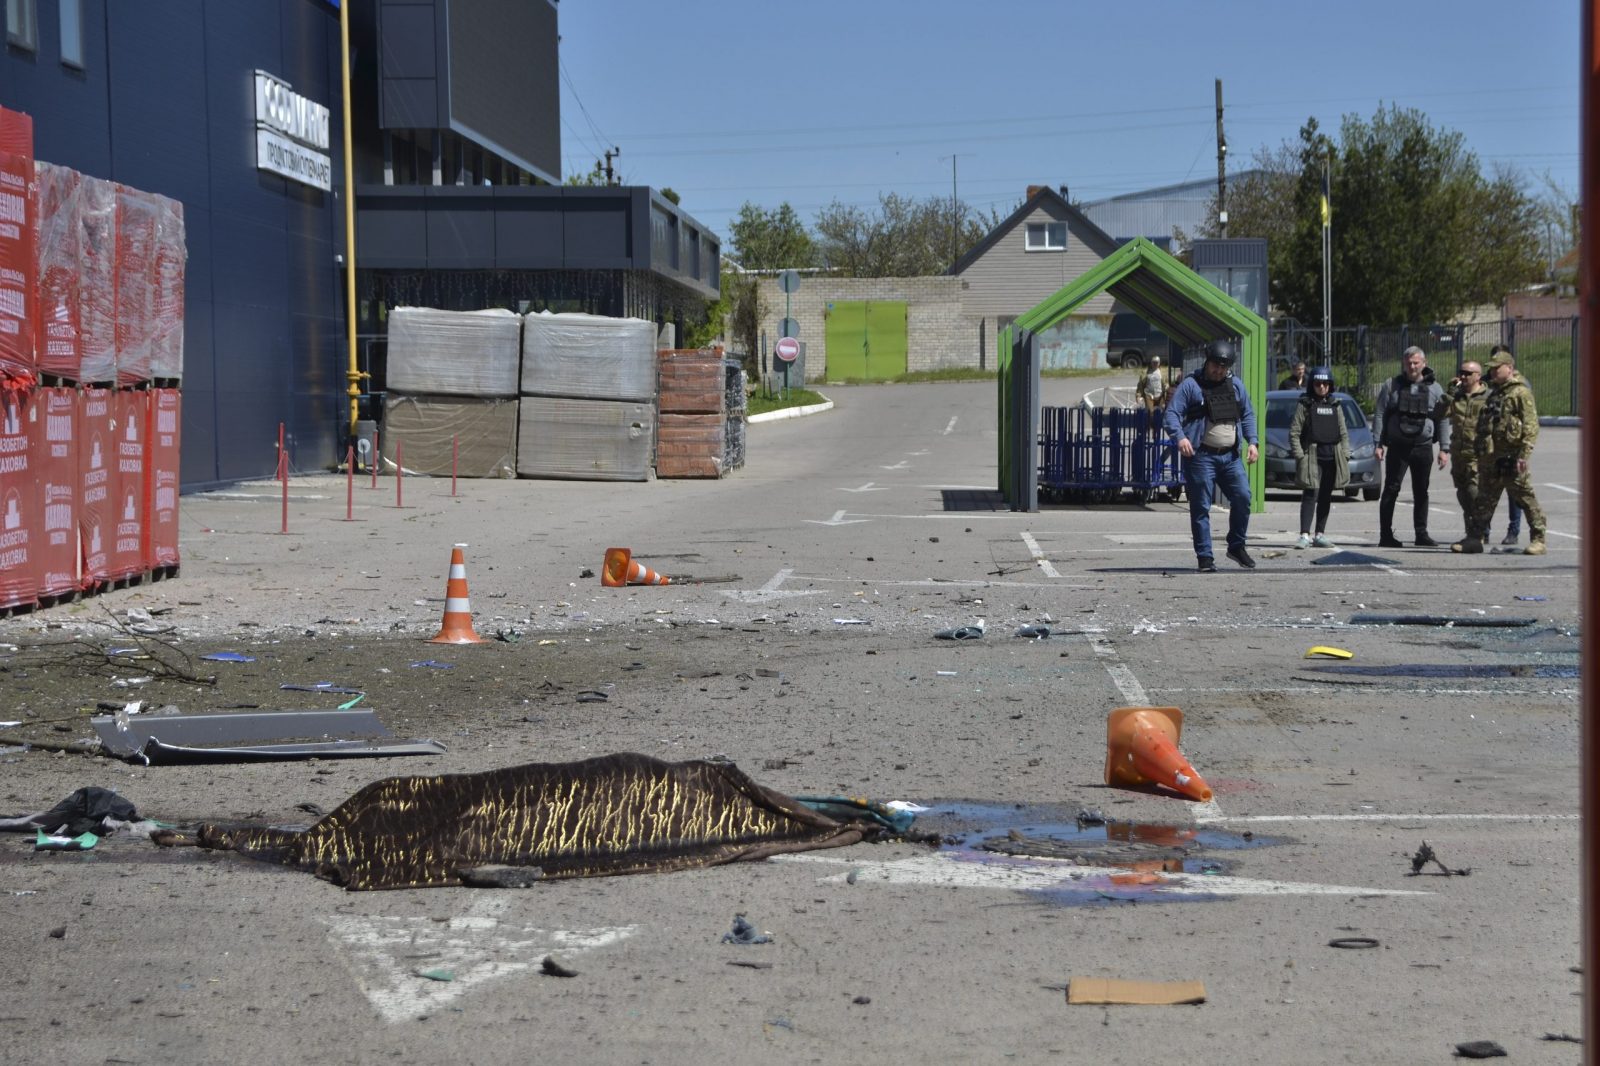 epa10606513 The covered body of a dead person, lies in front of a shelled construction hypermarket in Kherson, Ukraine, 03 May 2023 amid the Russian invasion. Russian troops struck the construction hypermarket, railway station, gas station and residential area of Kherson. At least 16 people were killed and 28 injured by Russian shelling of Kherson region, on 03 May, Roman Mrochko, Head of the Kherson City Military Administration reported.  EPA/IVAN ANTYPENKO